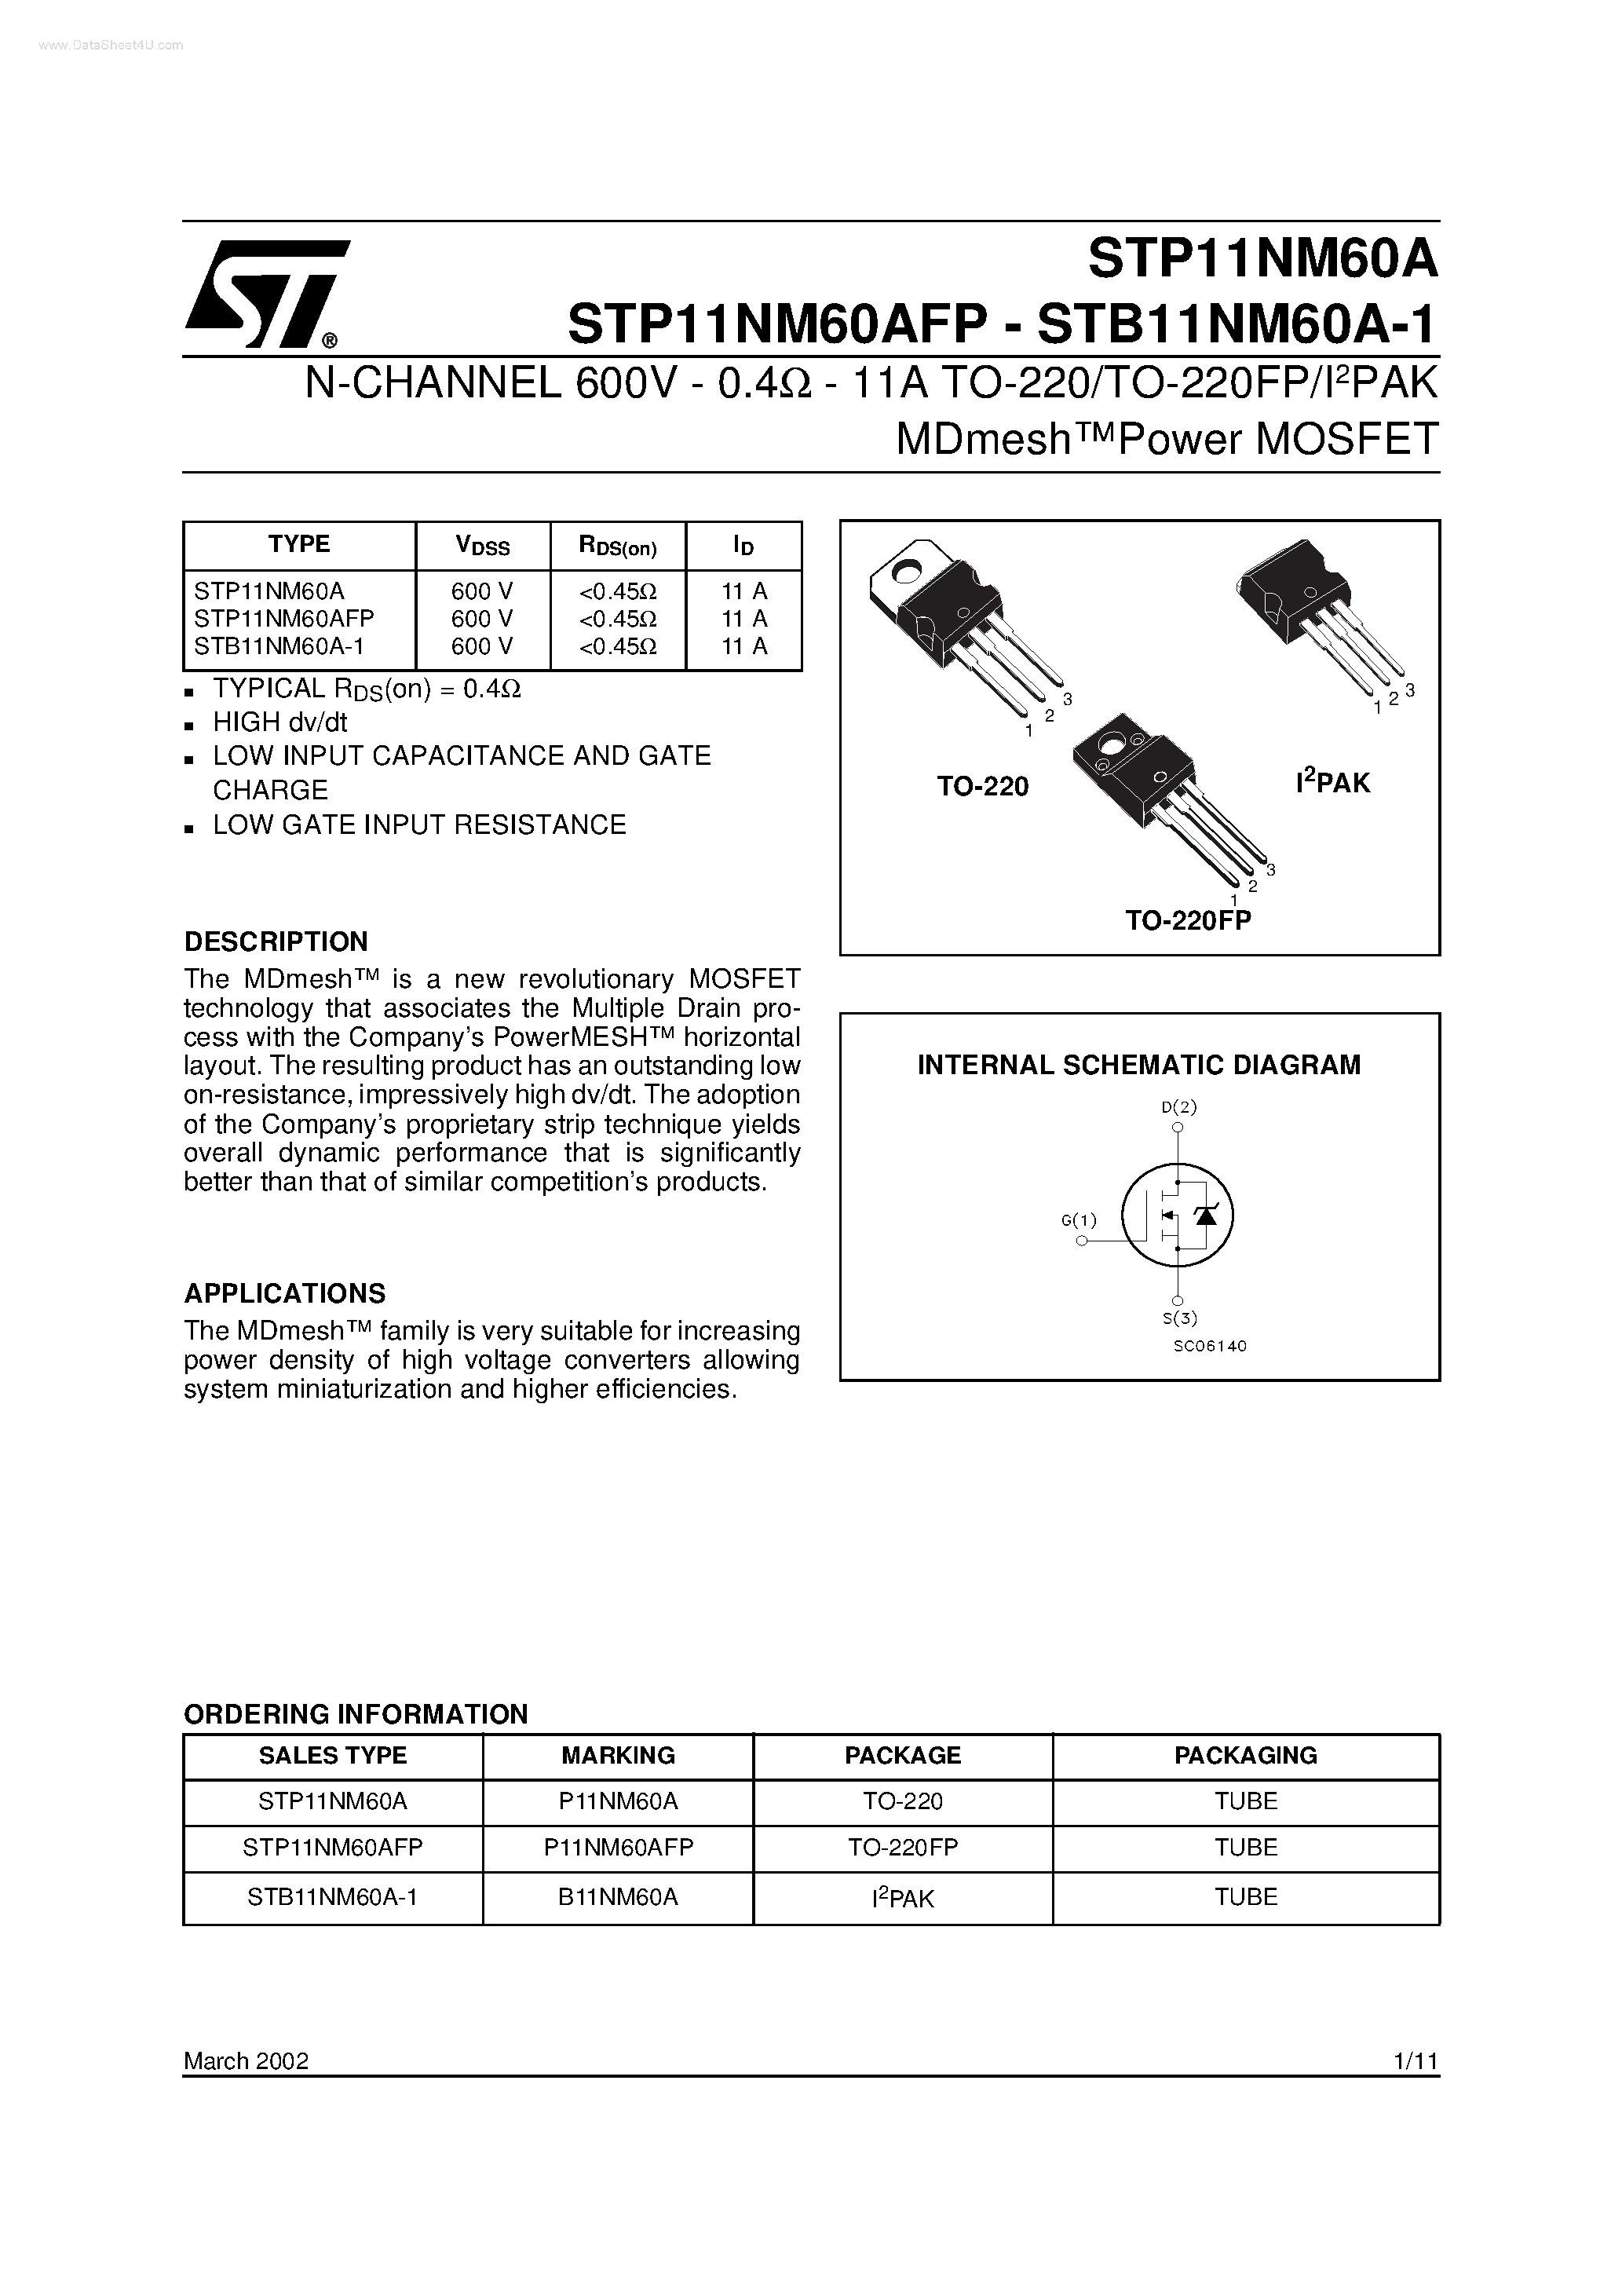 Datasheet STP11NM60A - N-CHANNEL Power MOSFET page 1